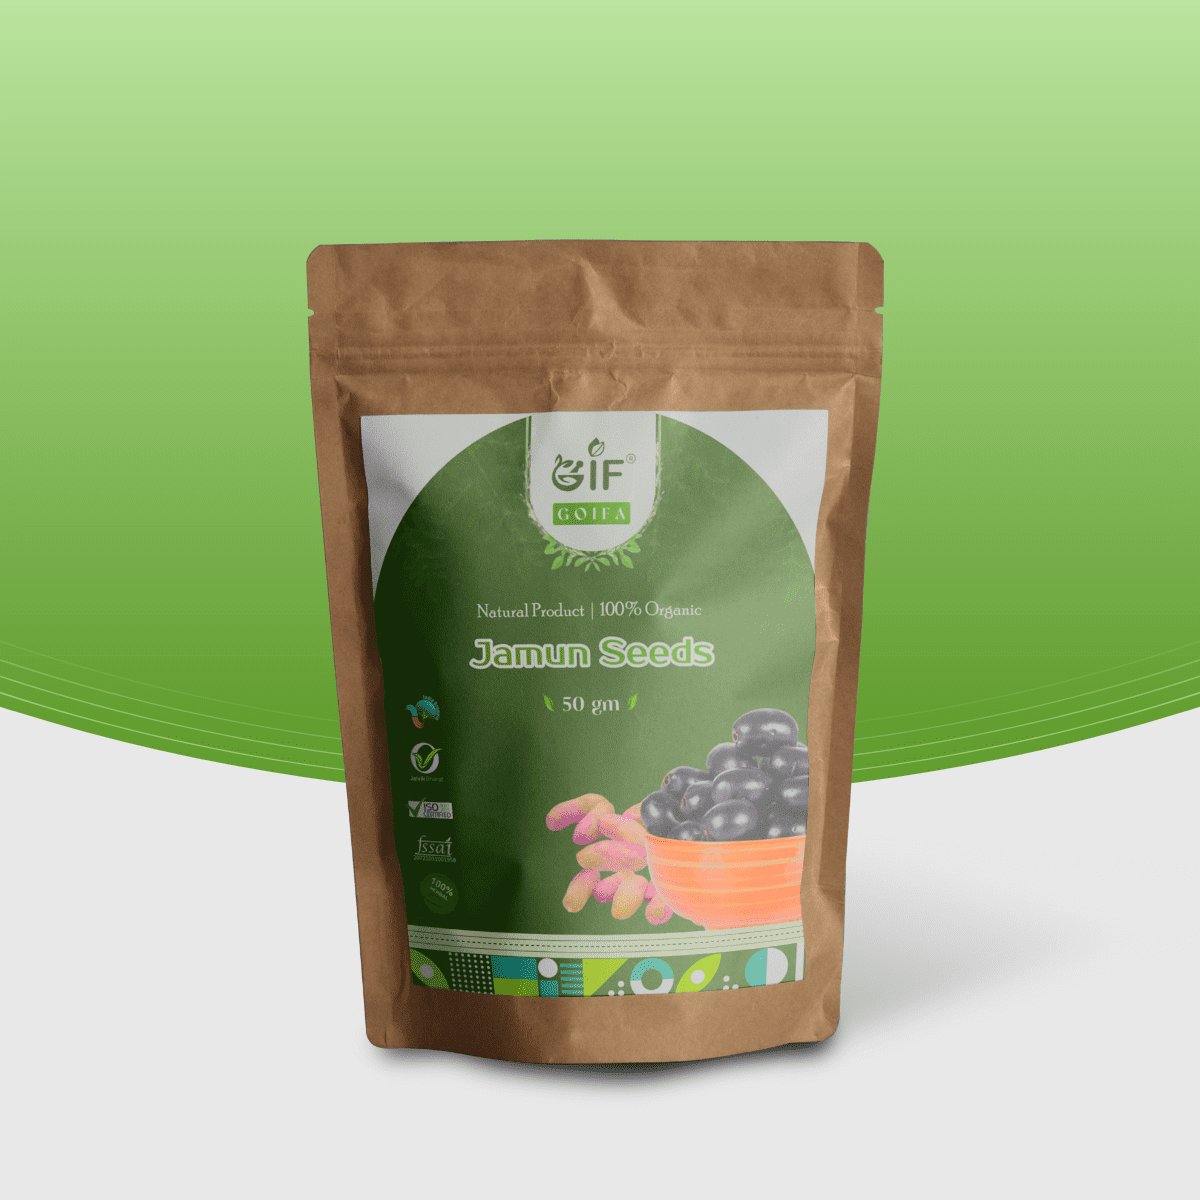 Goinfa — GIF Herbal Products